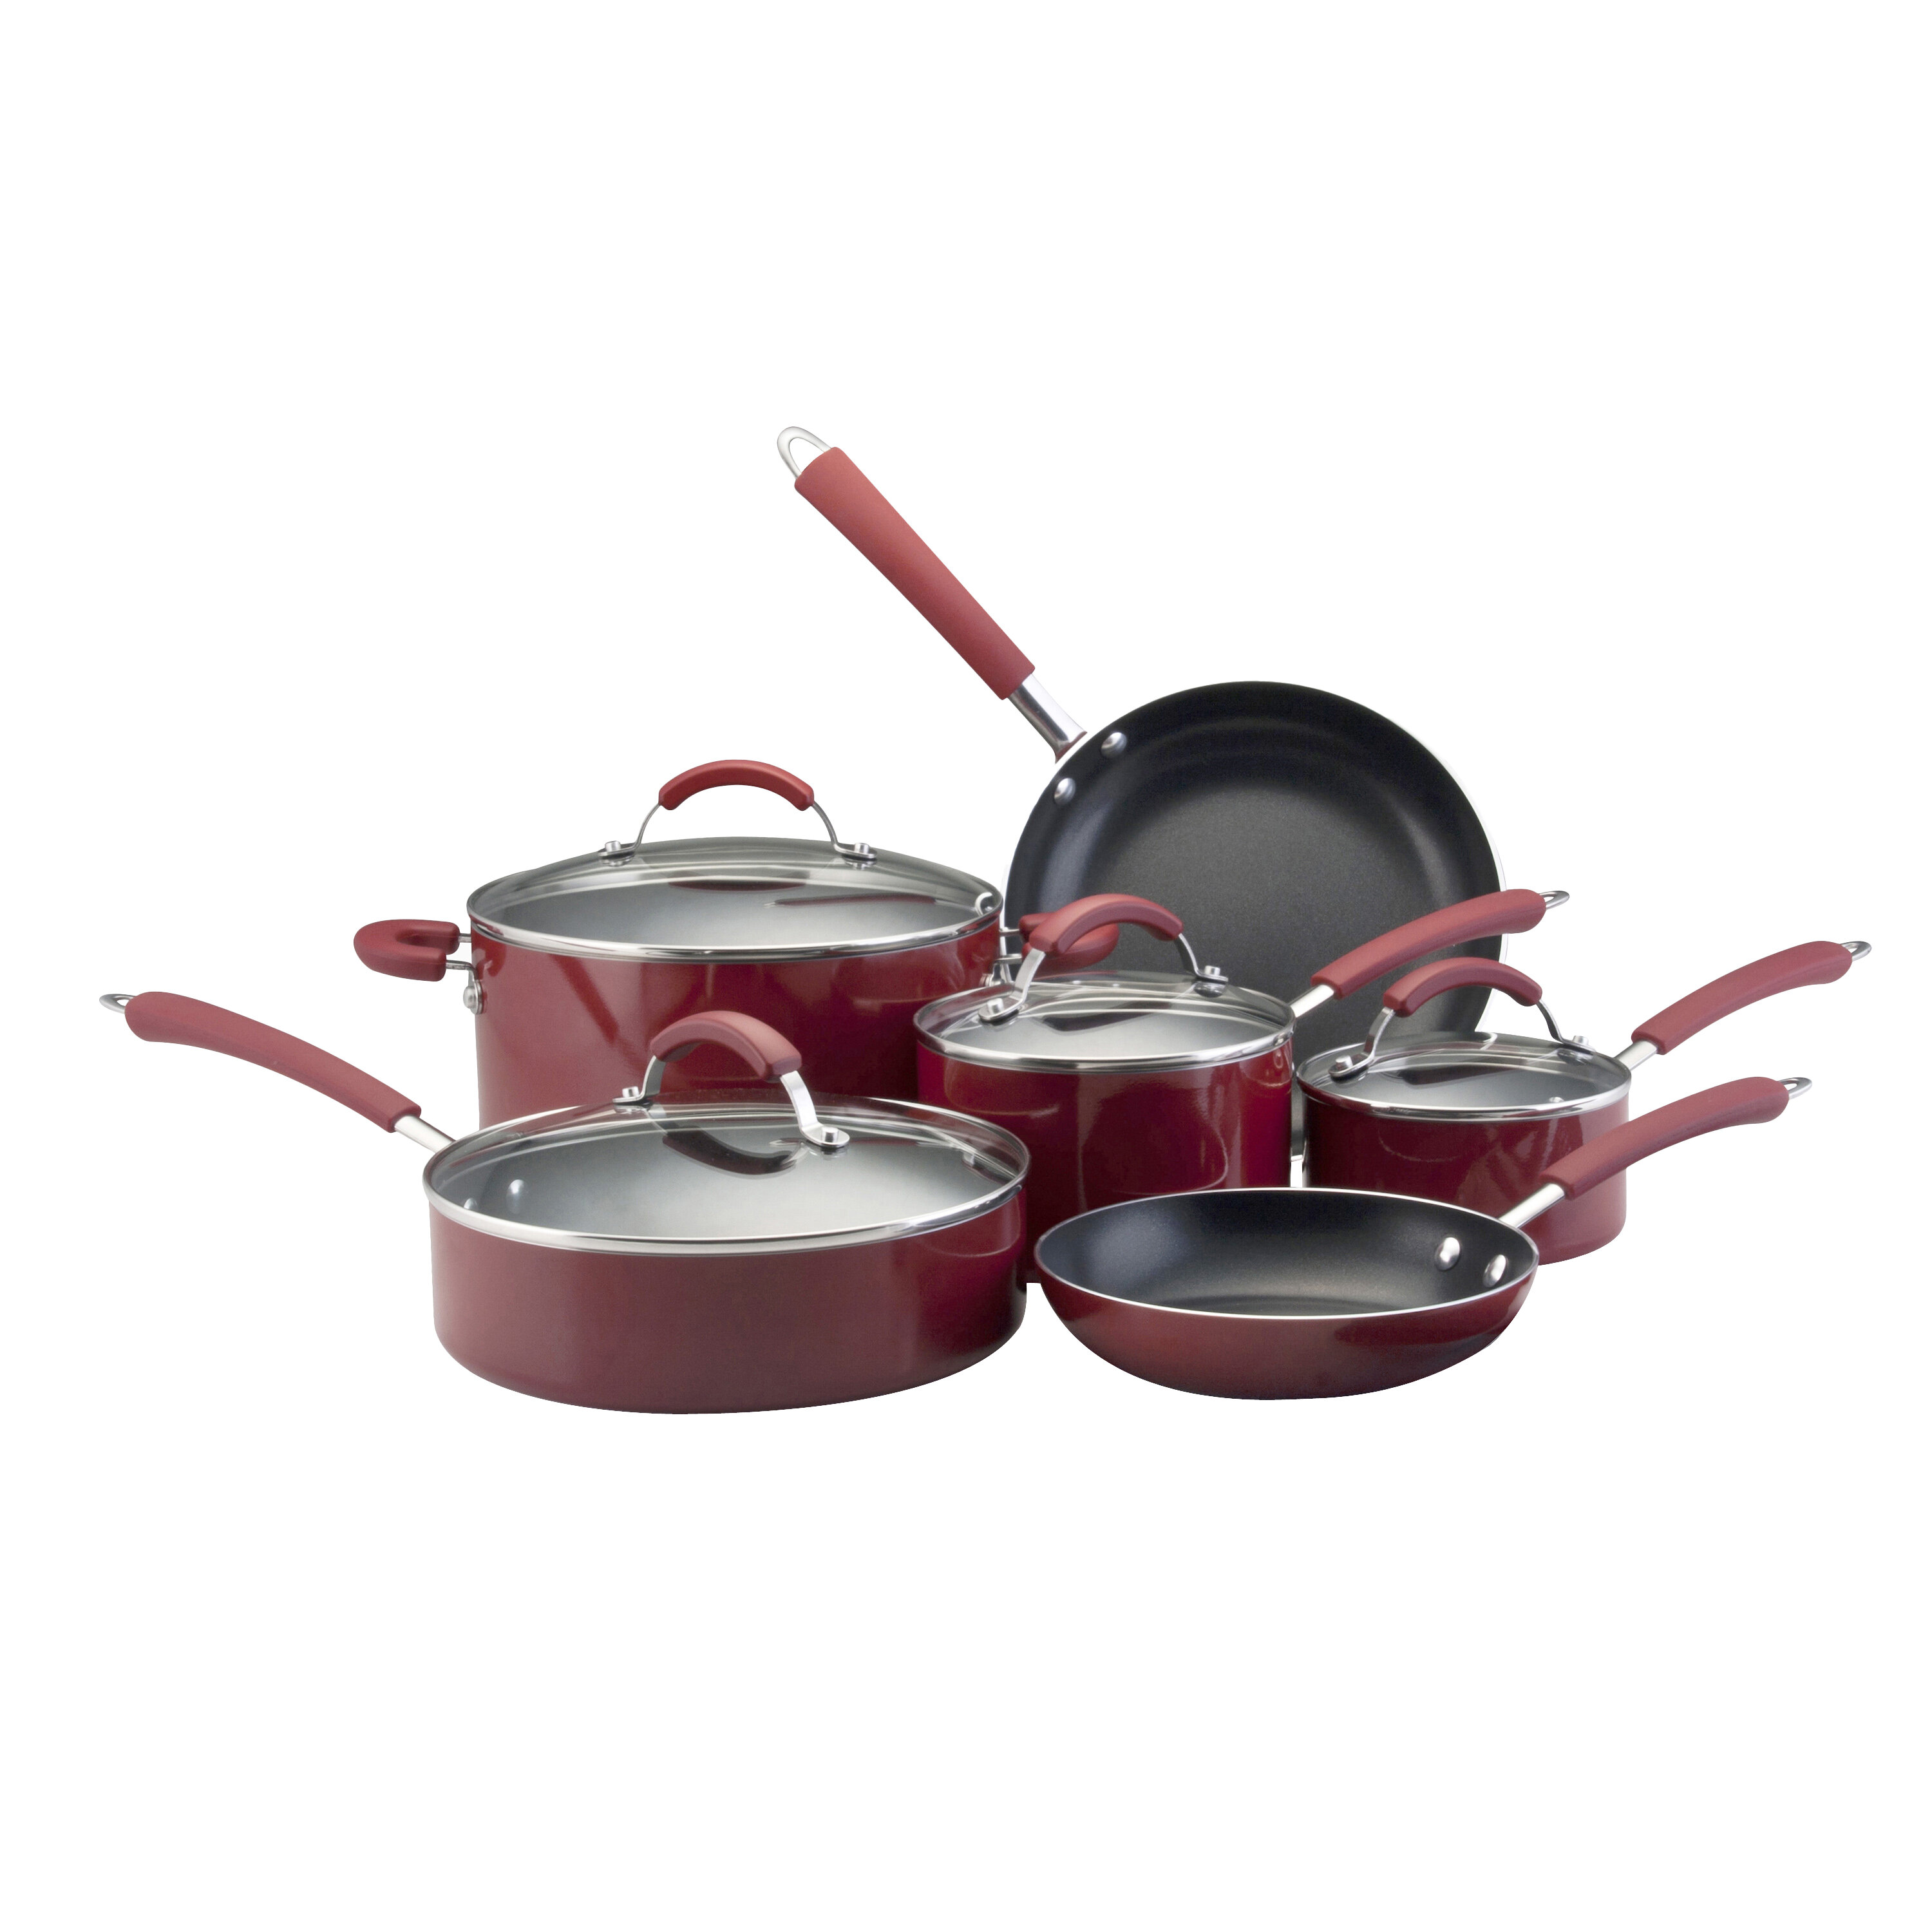 Farberware Easy Clean Pro Aluminum Nonstick Cookware Pots and Pans Set, 14-Piece, Red